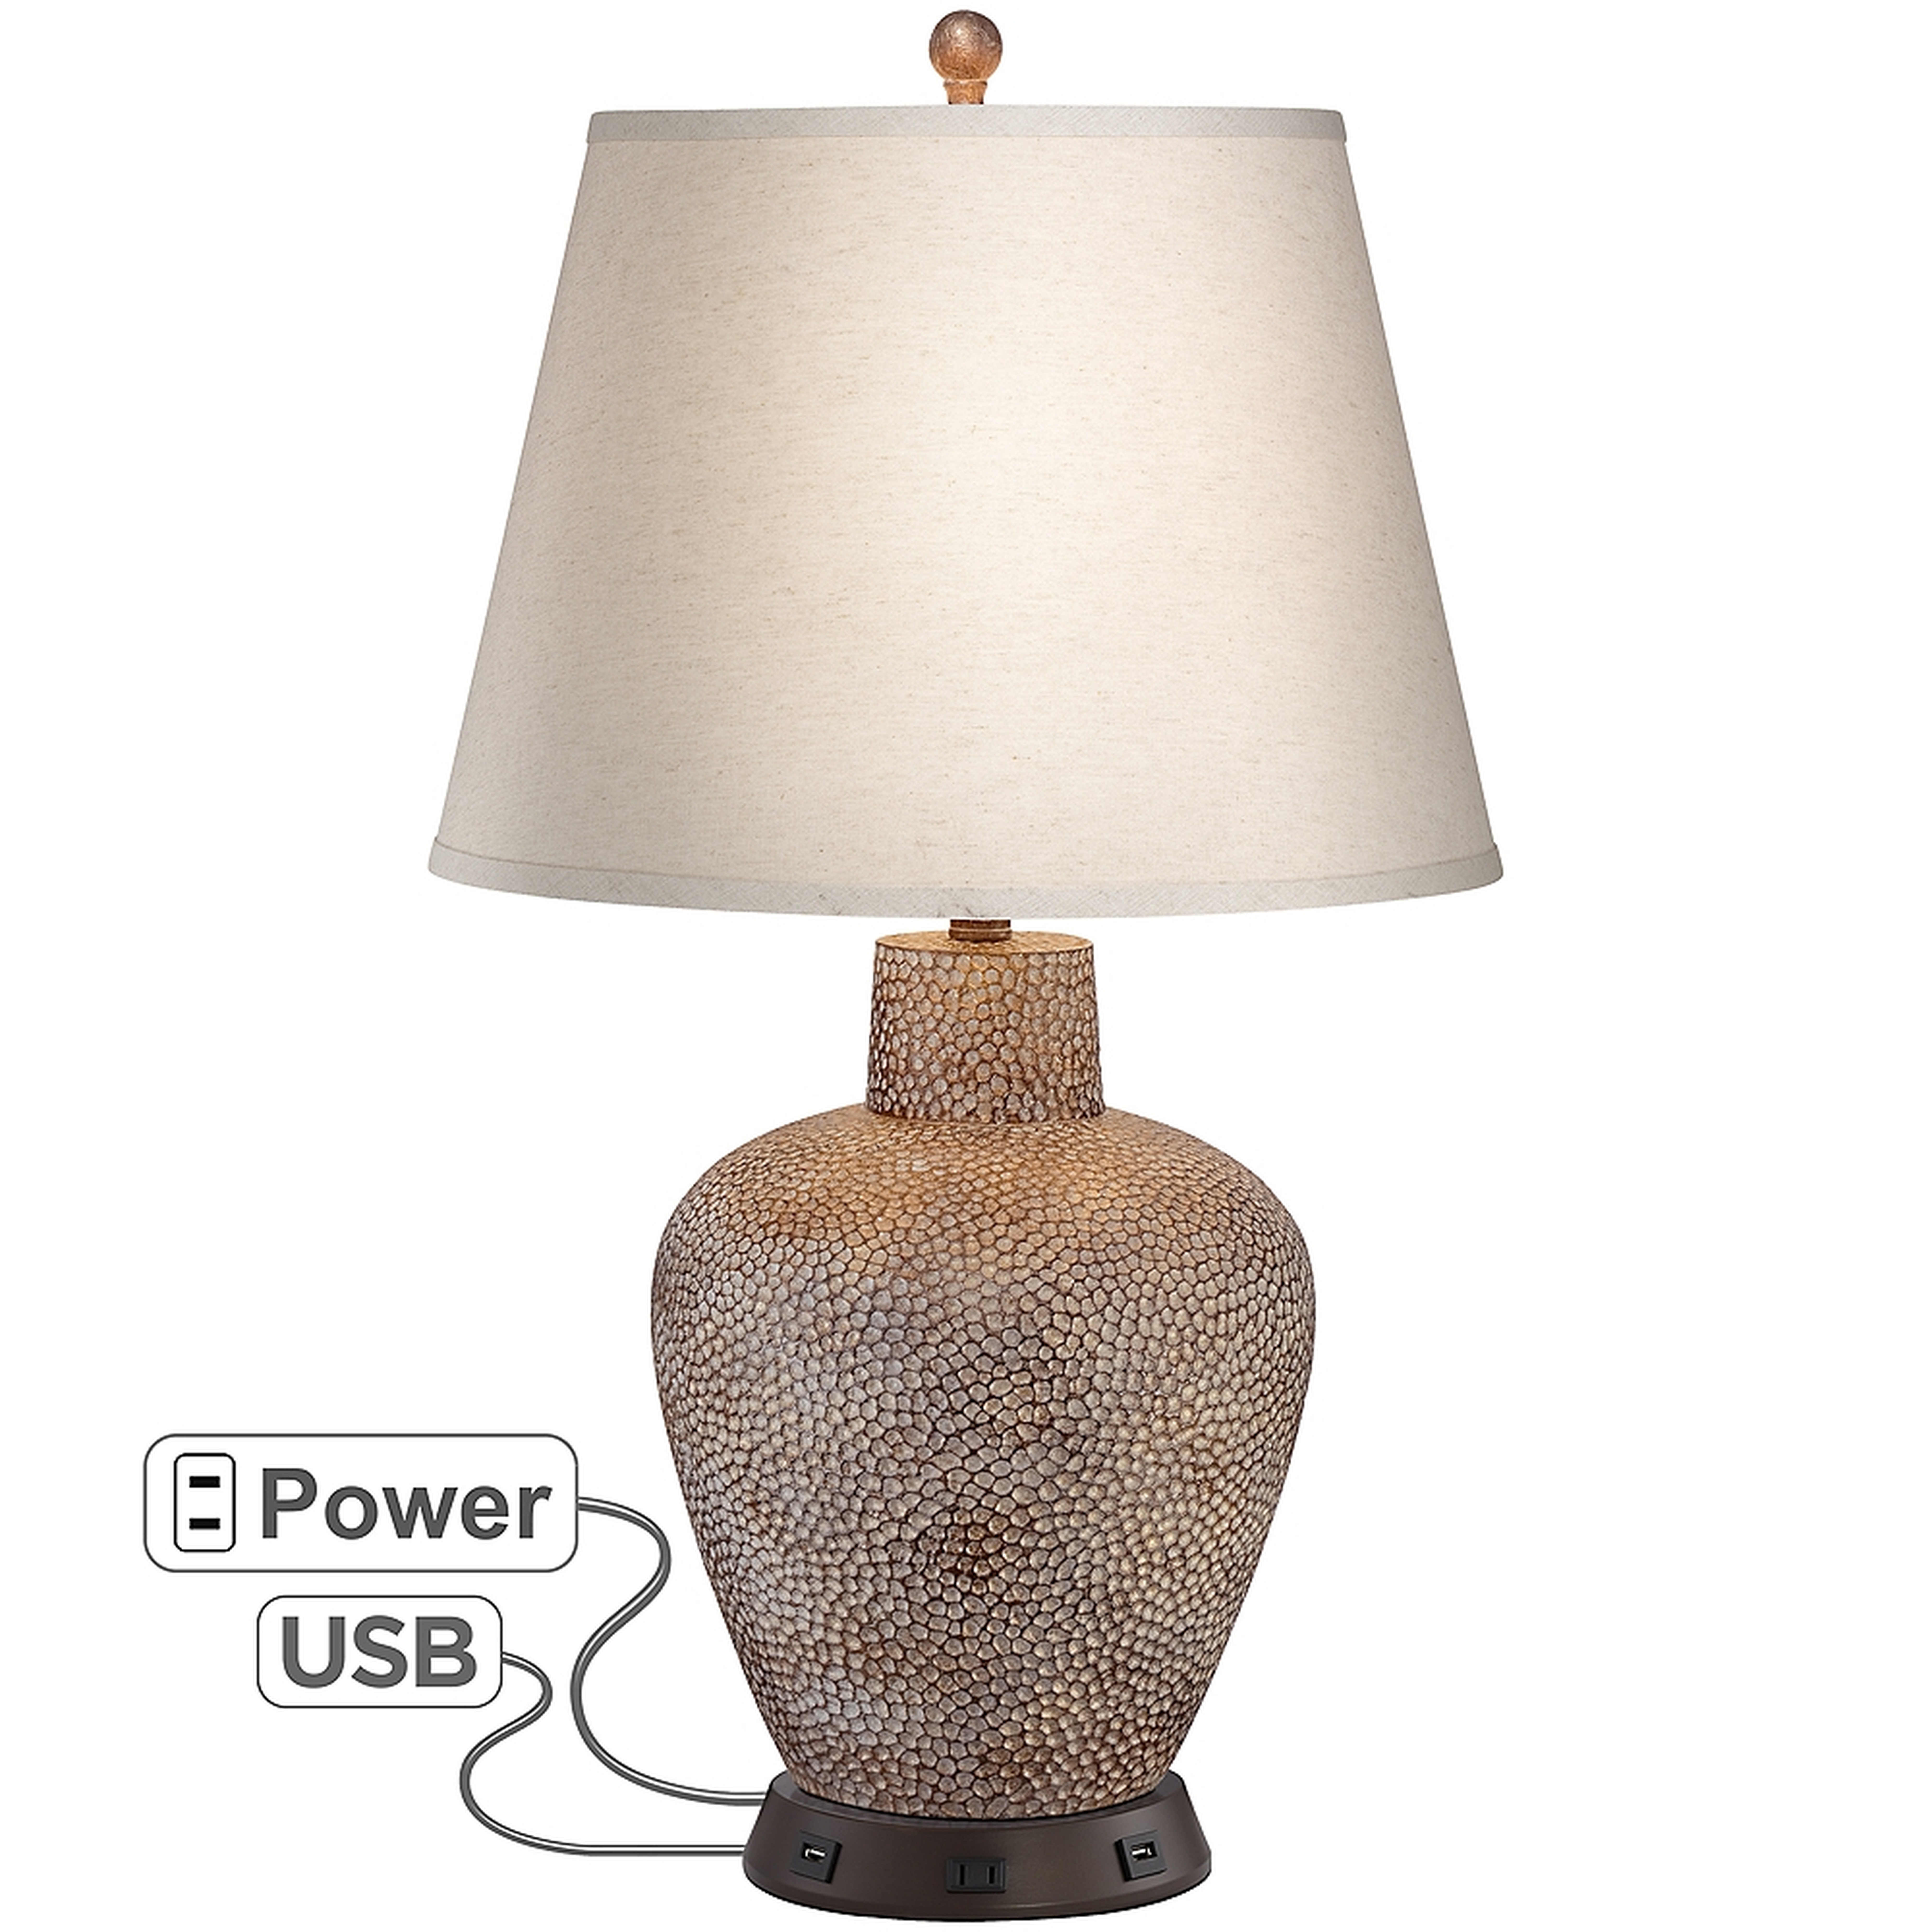 Bentley Brown Hammered Pot Table Lamp with USB Workstation Base - Style # 68V21 - Lamps Plus